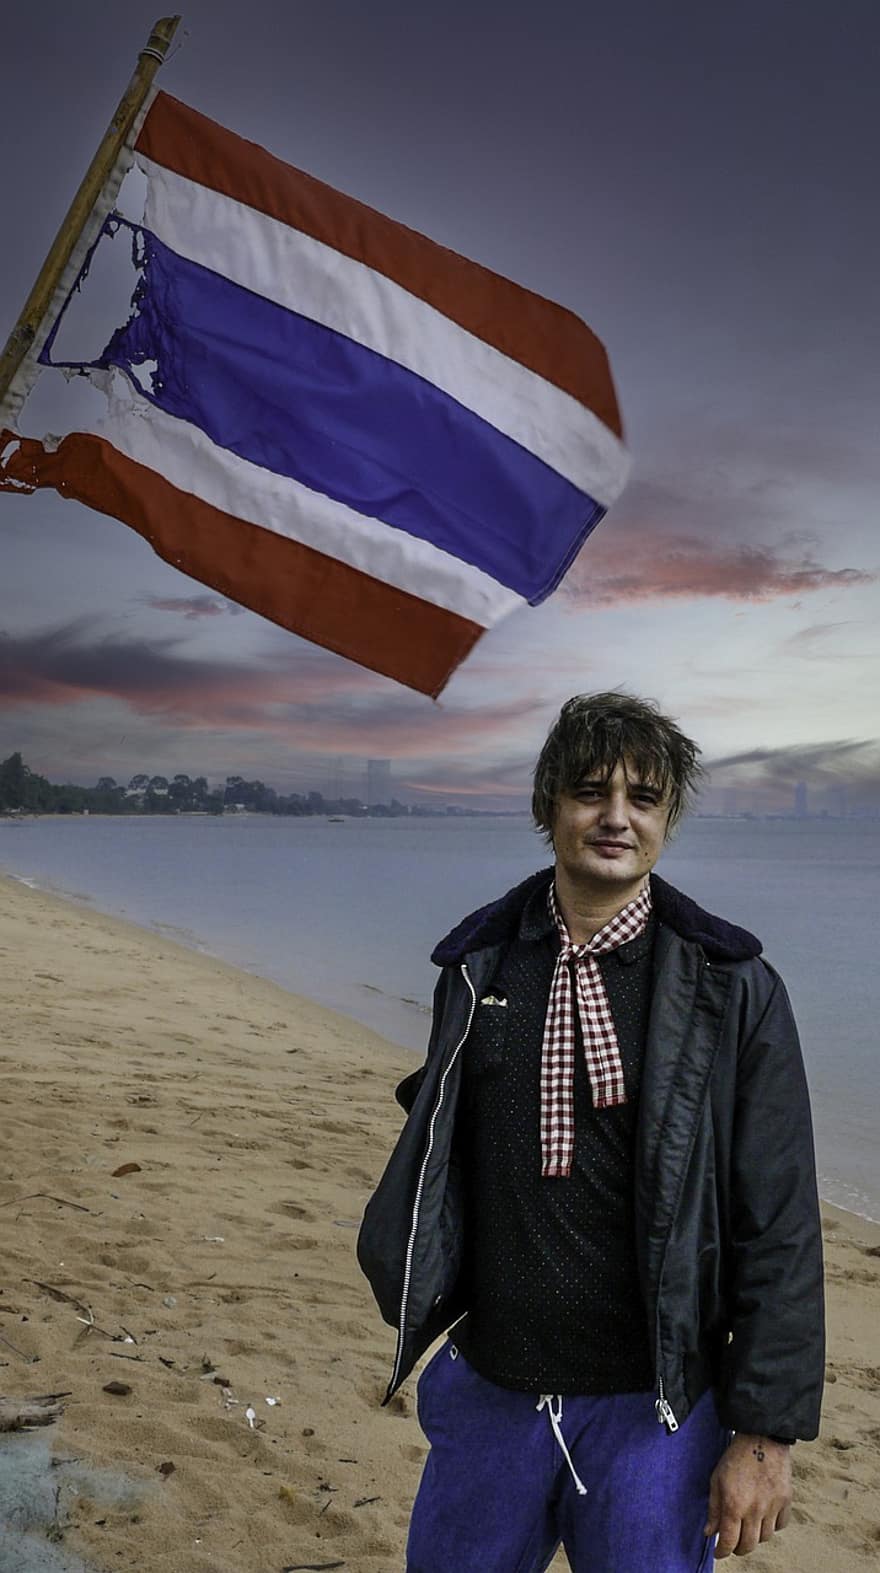 Pete Doherty, The Libertines, Indie, Rock And Roll, Thailand, Bang Saray, men, one person, adult, smiling, cheerful